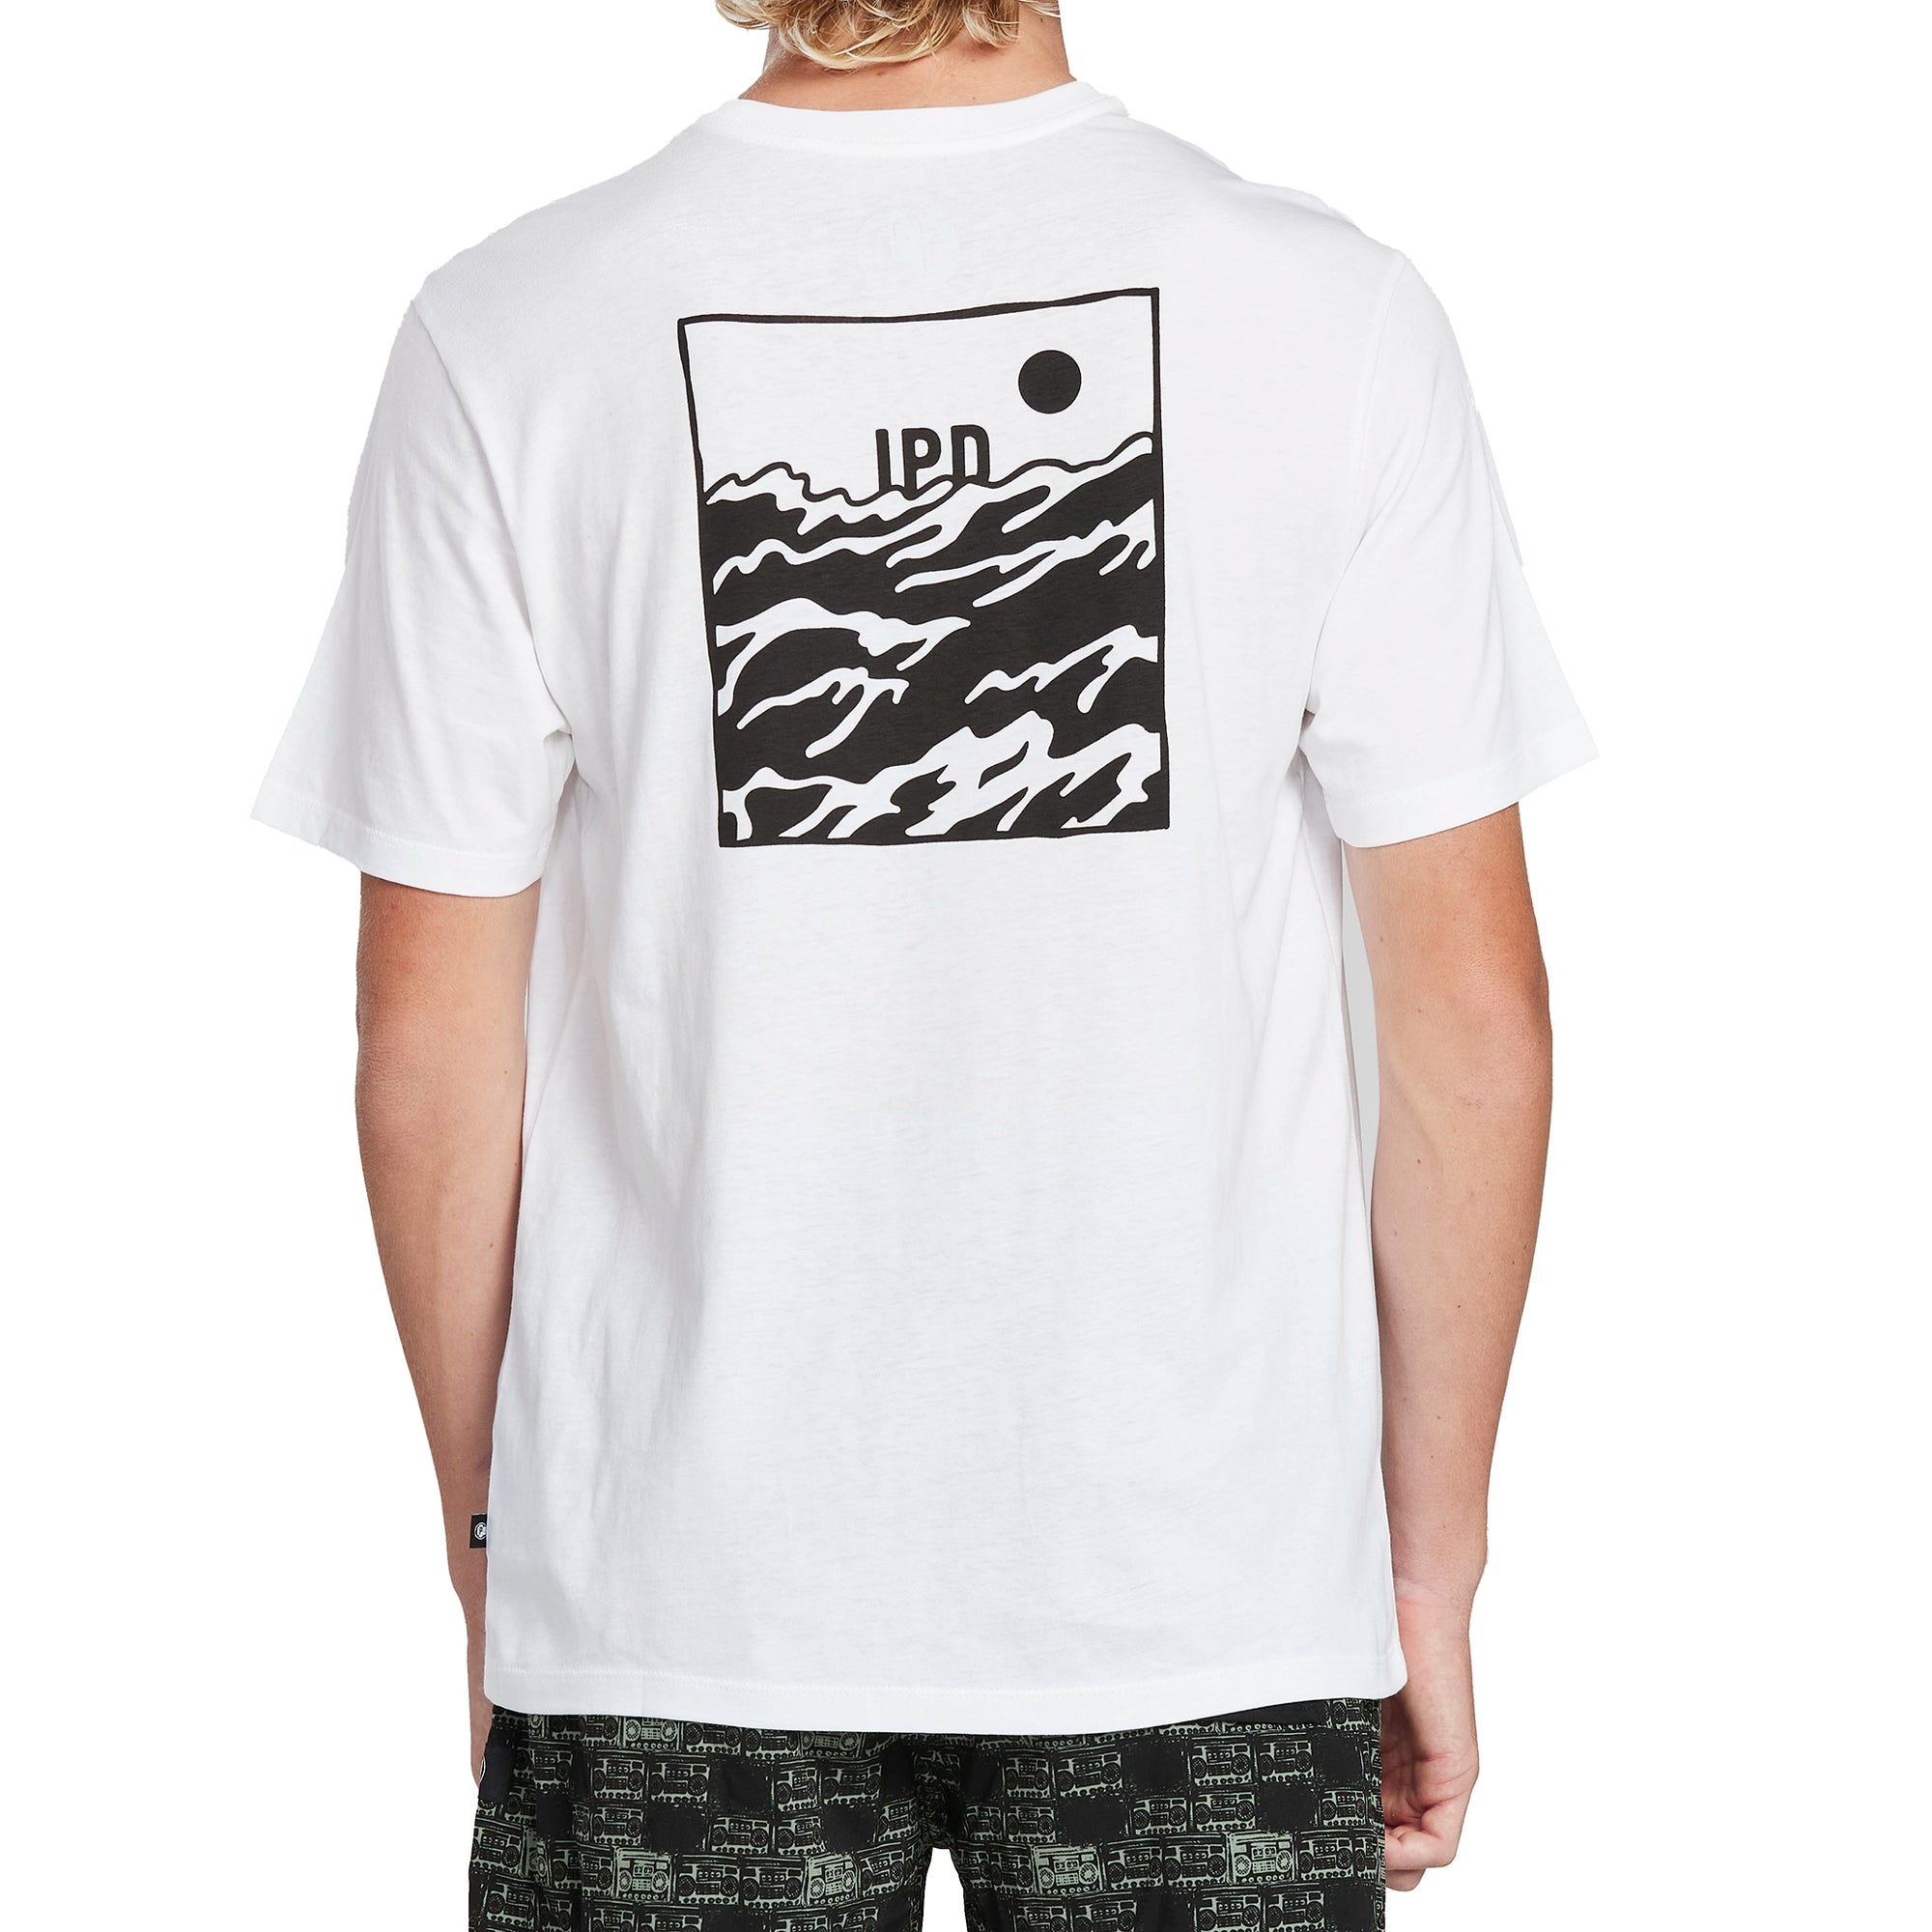 Back of a moonstone gray short sleeve tee with a large, light mineral green rectangular framed print of choppy water with the letters I P D above the water and a circular sun in the top right corner of the frame.